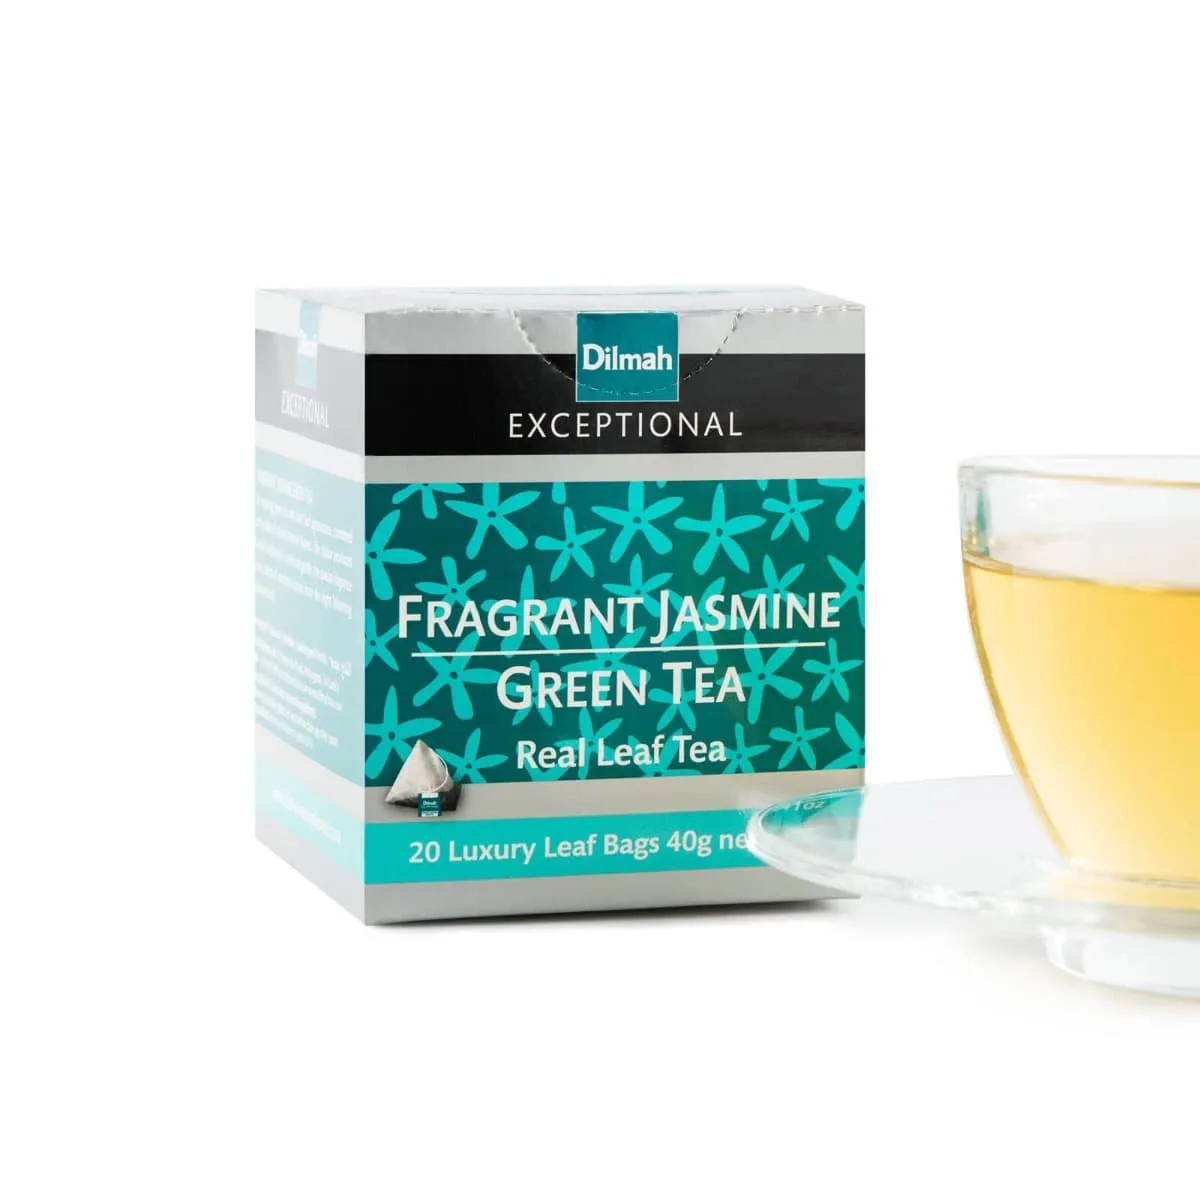 Pack of Fragrant Jasmine green tea with a cup of this tea